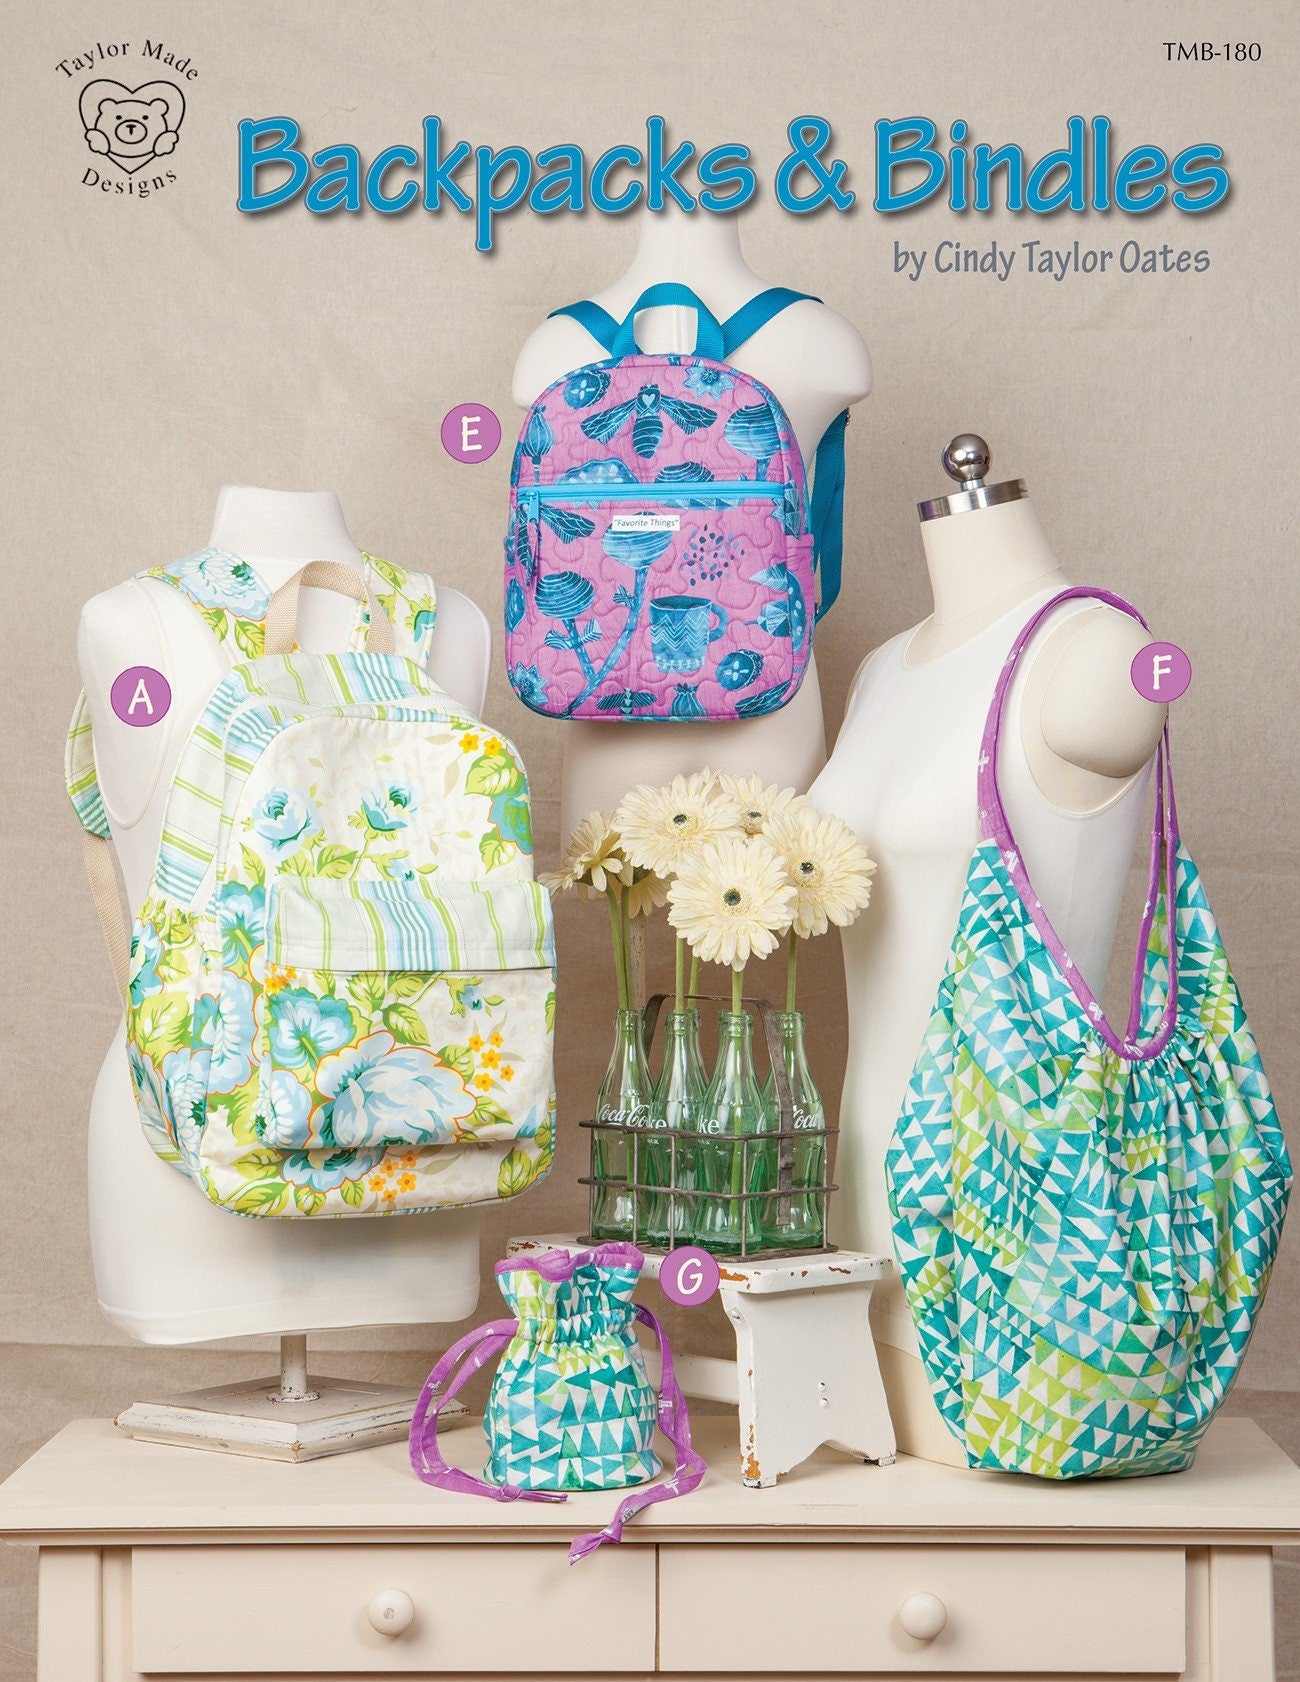 Backpacks And Bindles Sewing Pattern Book by Cindy Taylor Oates of Taylor Made Designs